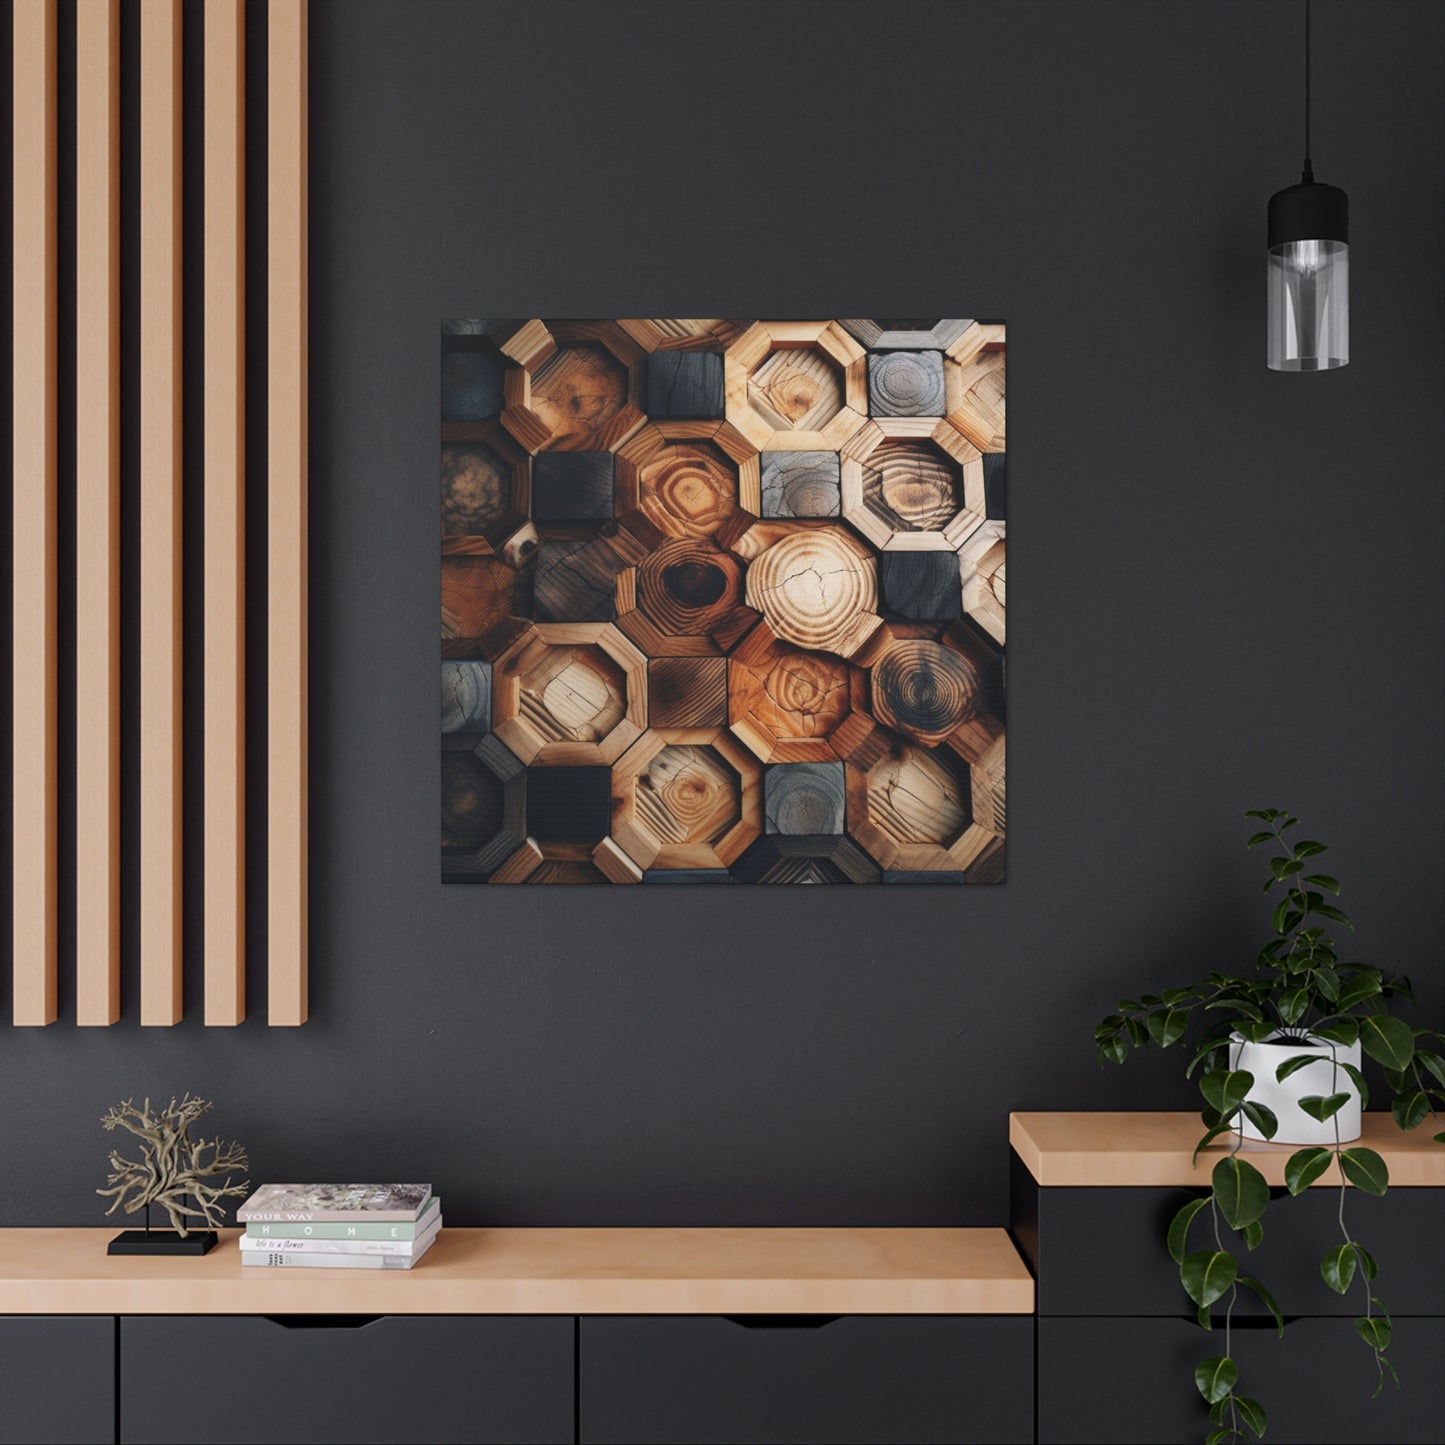 "Geometric Wood" Wall Art - Weave Got Gifts - Unique Gifts You Won’t Find Anywhere Else!